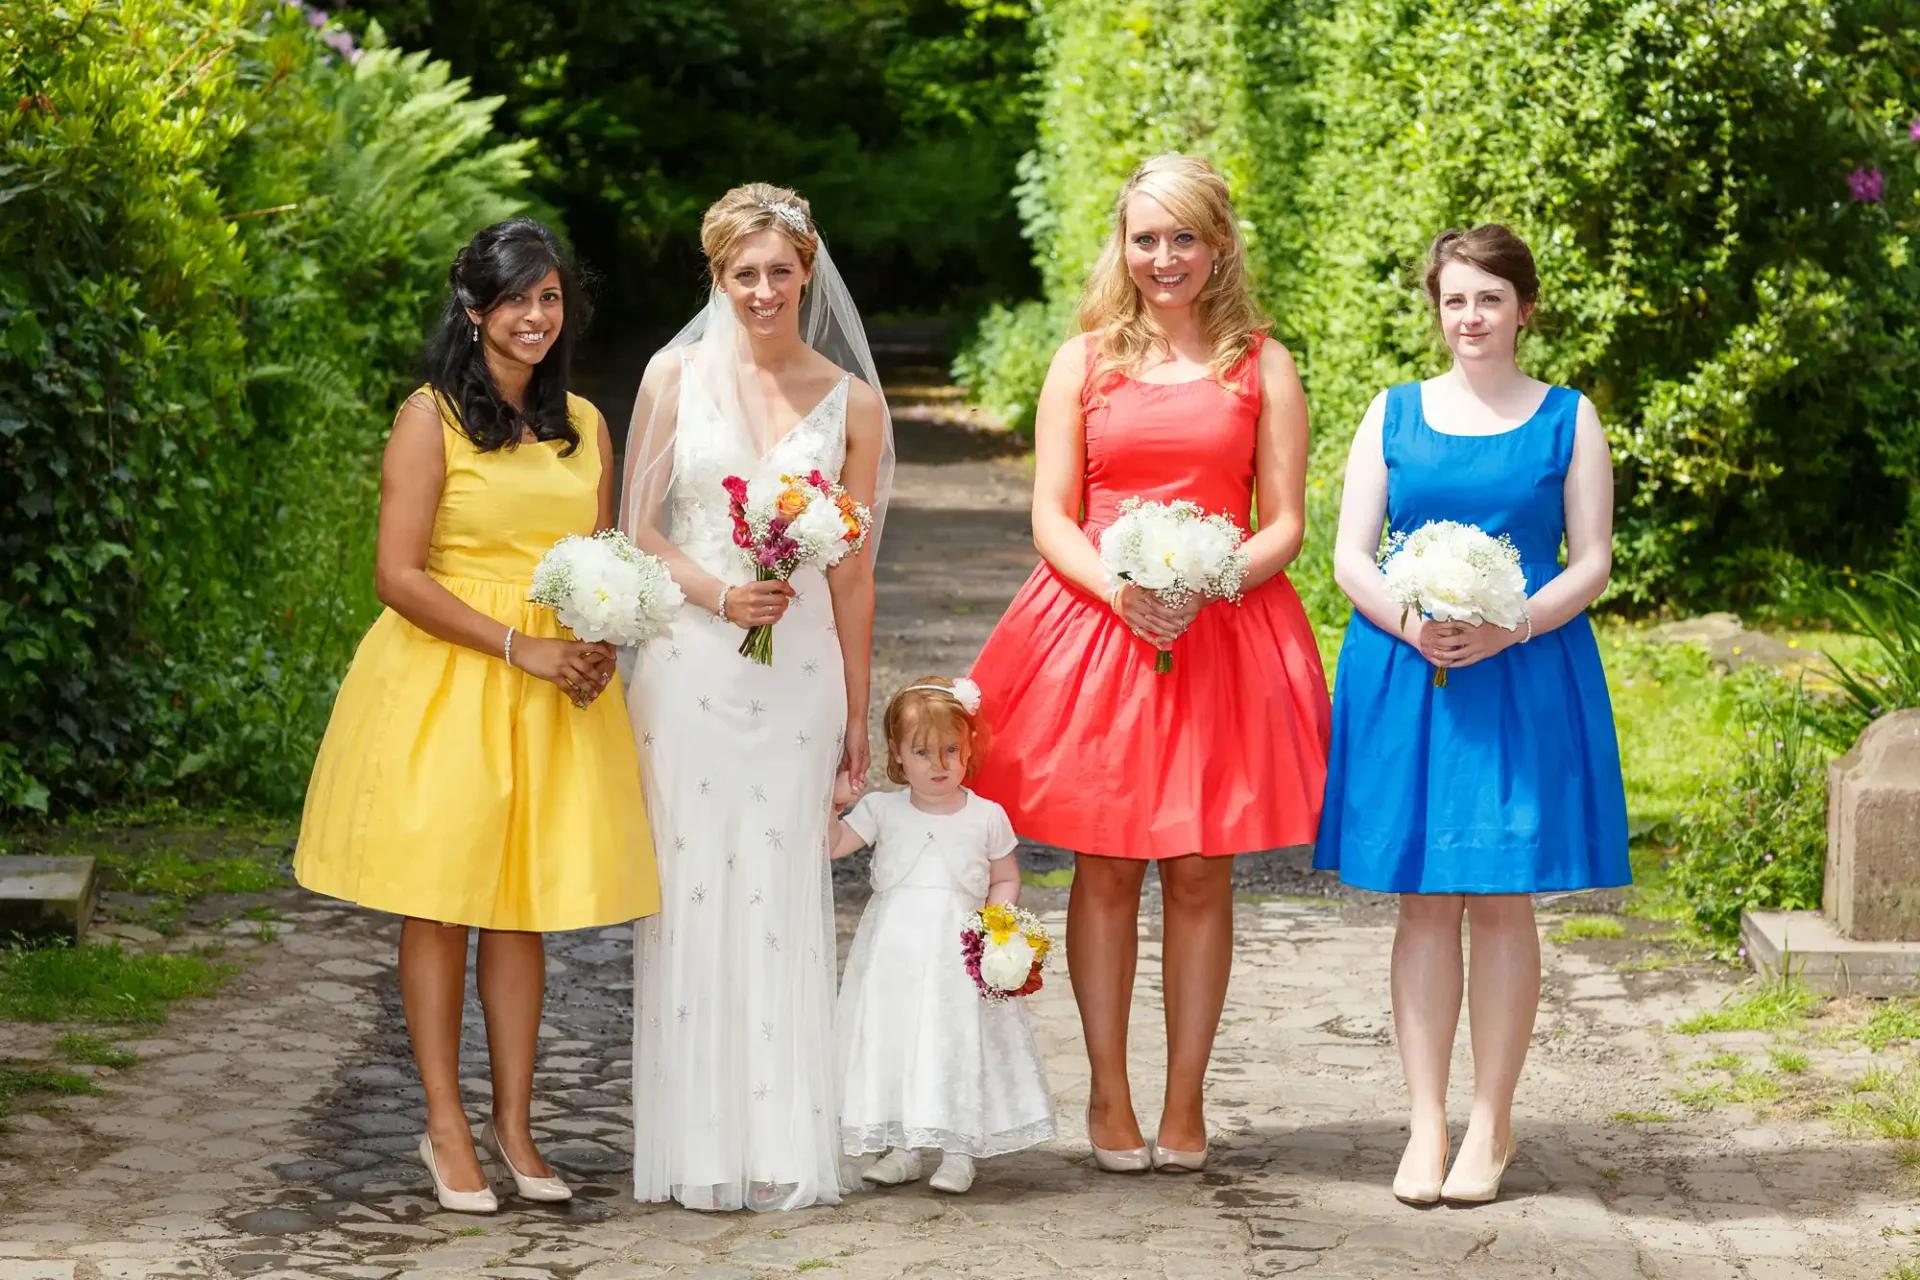 A bride in a white dress and three bridesmaids in yellow, red, and blue dresses, alongside a young flower girl, posing in a lush garden.